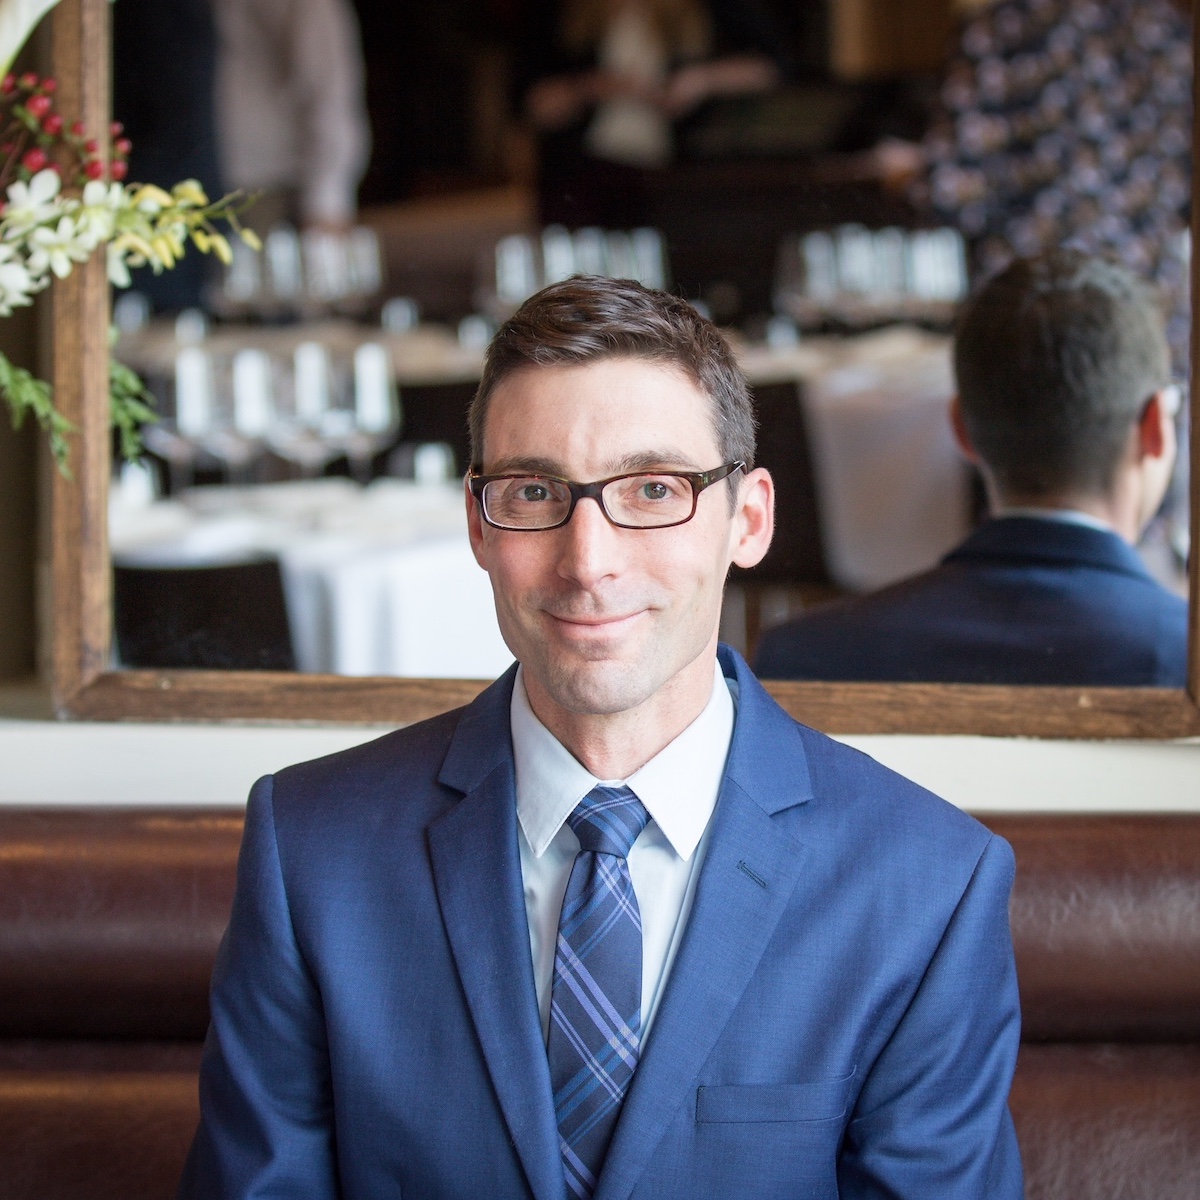 Man in blue suit with dark hair and glasses smiles and looks at the camera in a restaurant booth